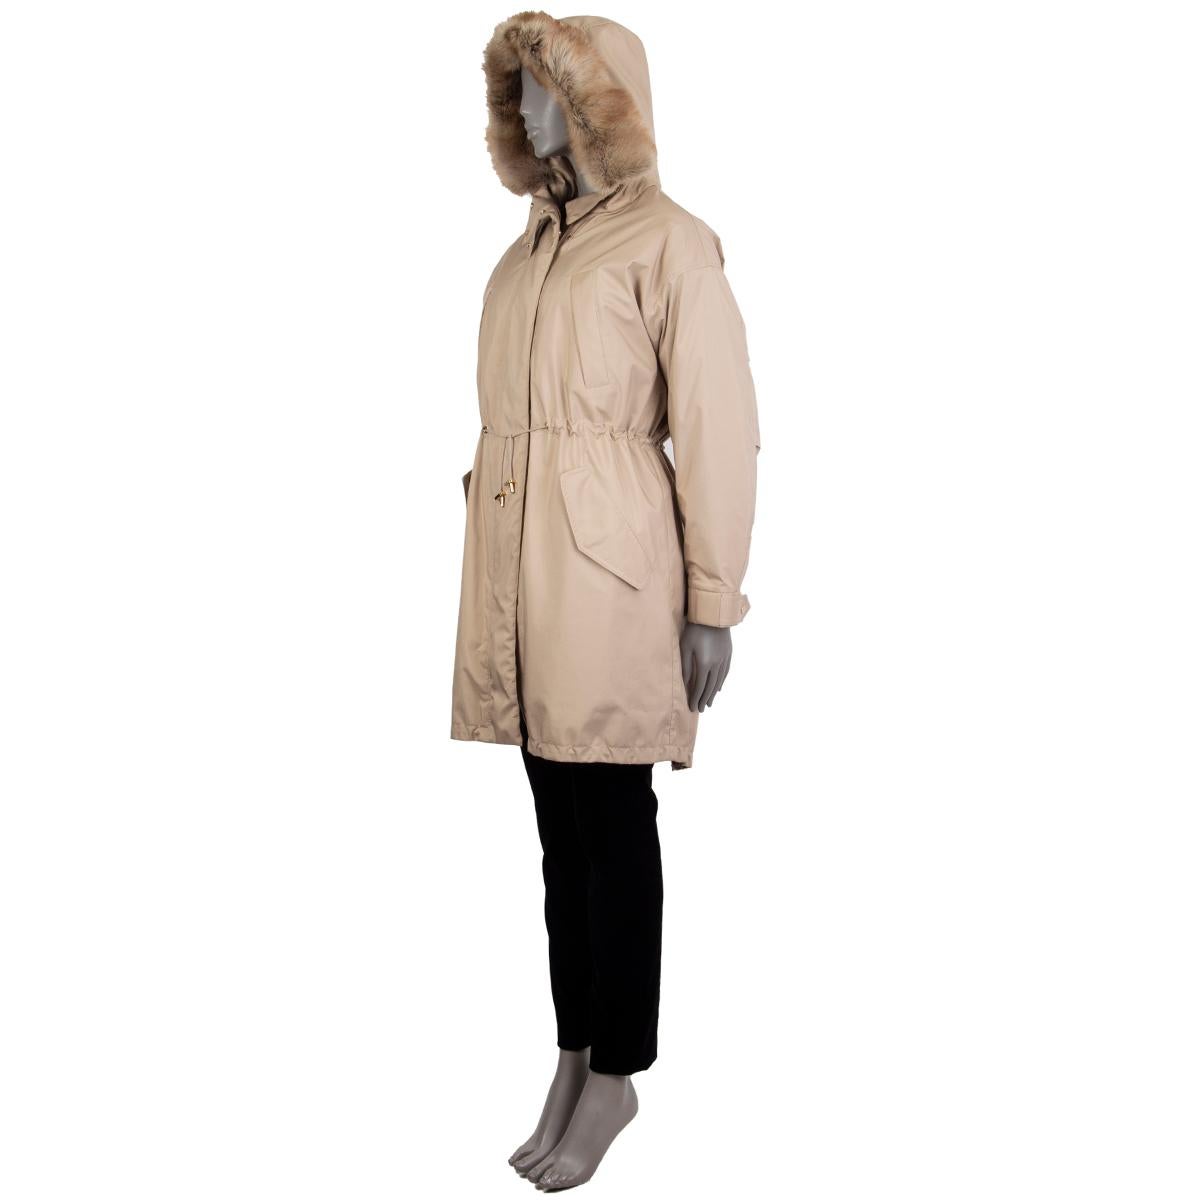 Loro Piana hooded down parka in beige polyester (80%) and polyurethane (20%) with goose down filling. Features American marten fur trim around the hood, drawstring around the hood, waist, and hemline, two chest pockets, two buttoned flap pockets on